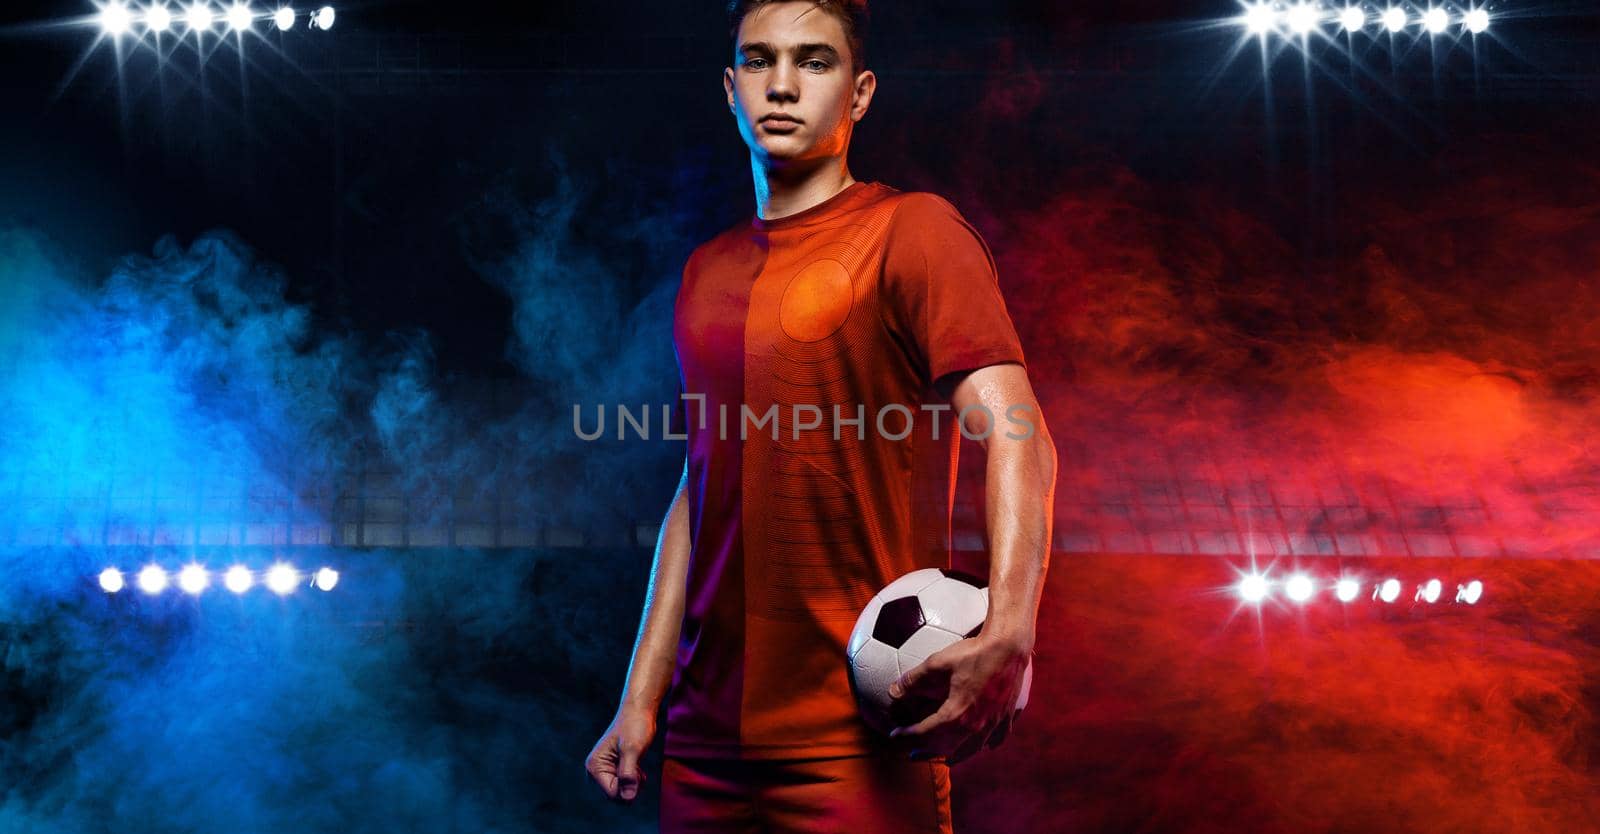 Teenager - soccer player. Man in football sportswear after game with ball. Sport concept. by MikeOrlov